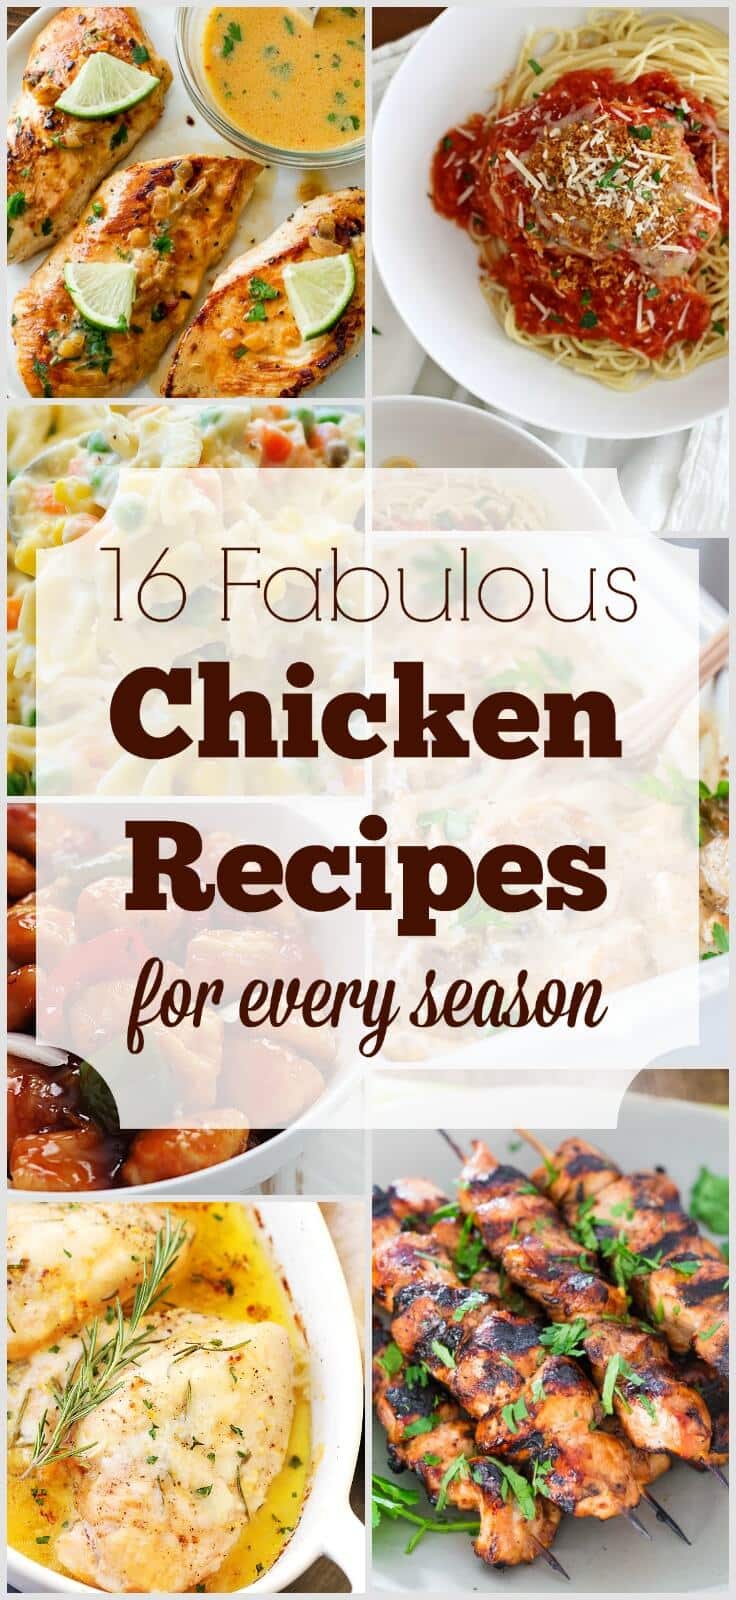 Winter, spring, summer, or fall... here are 16 great chicken recipes for them all!